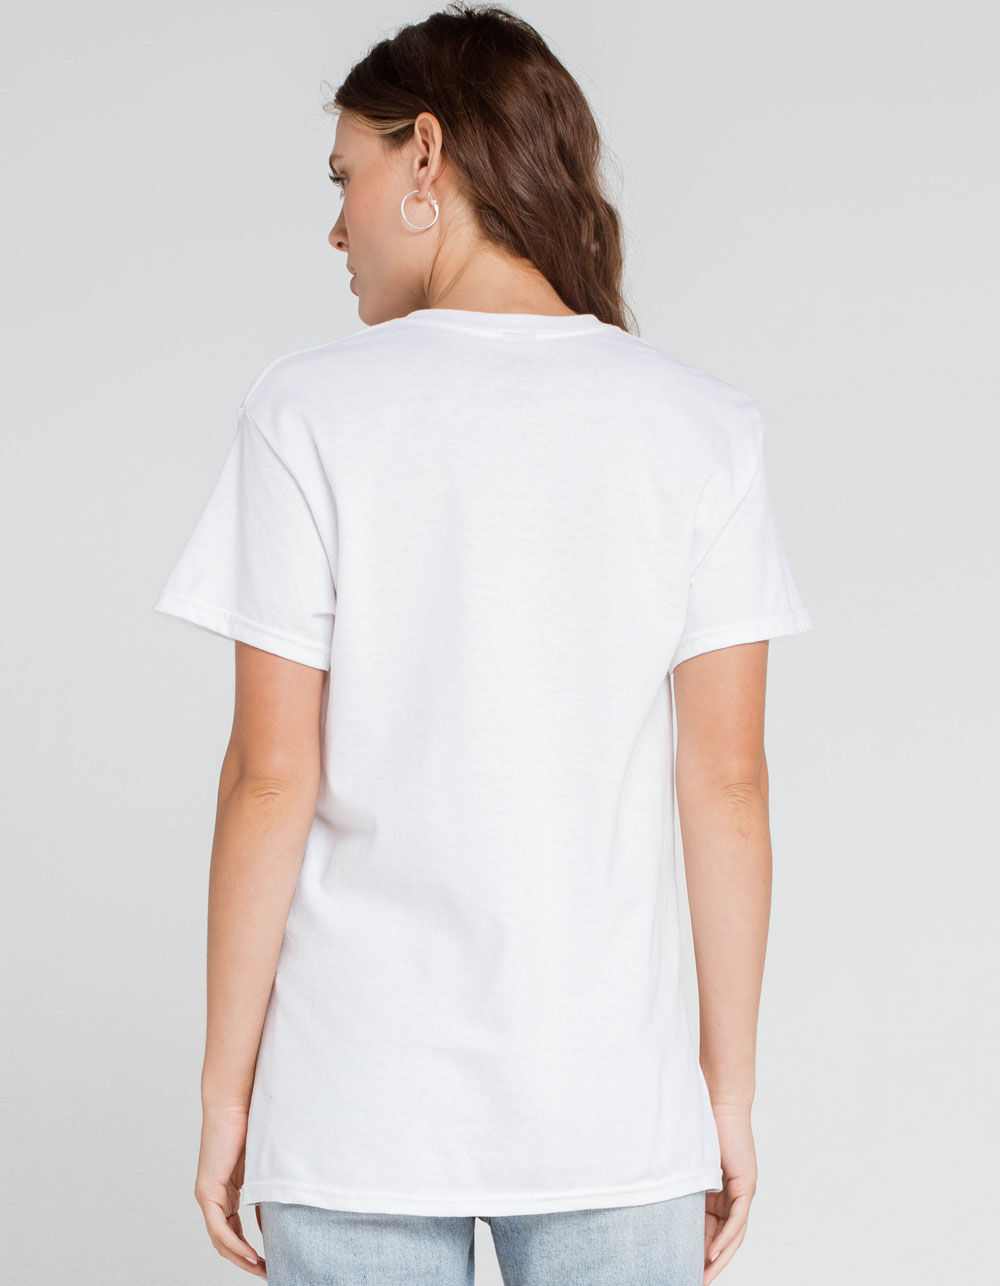 WEST OF MELROSE New Jersey Violets Womens Tee - WHITE | Tillys